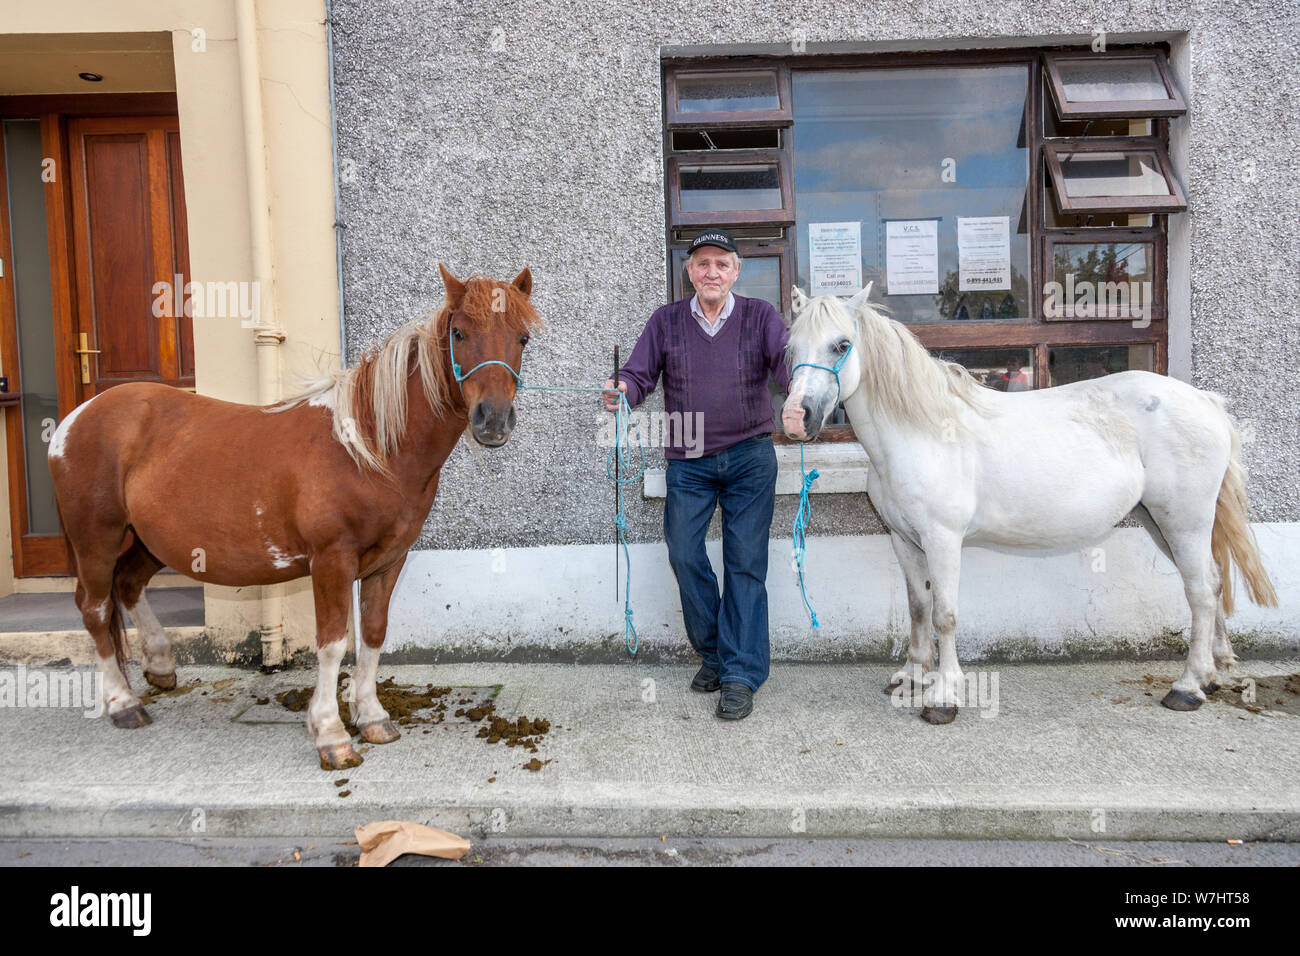 Dunmanway, Cork, Ireland. 06th August, 2019. David O'Sullivan from Leap with his two ponies at the Ballabuidhe Horse Fair that is held every August in Dunmanway, Co. Cork, Ireland. - Credit; David Creedon/Alamy Live News Stock Photo